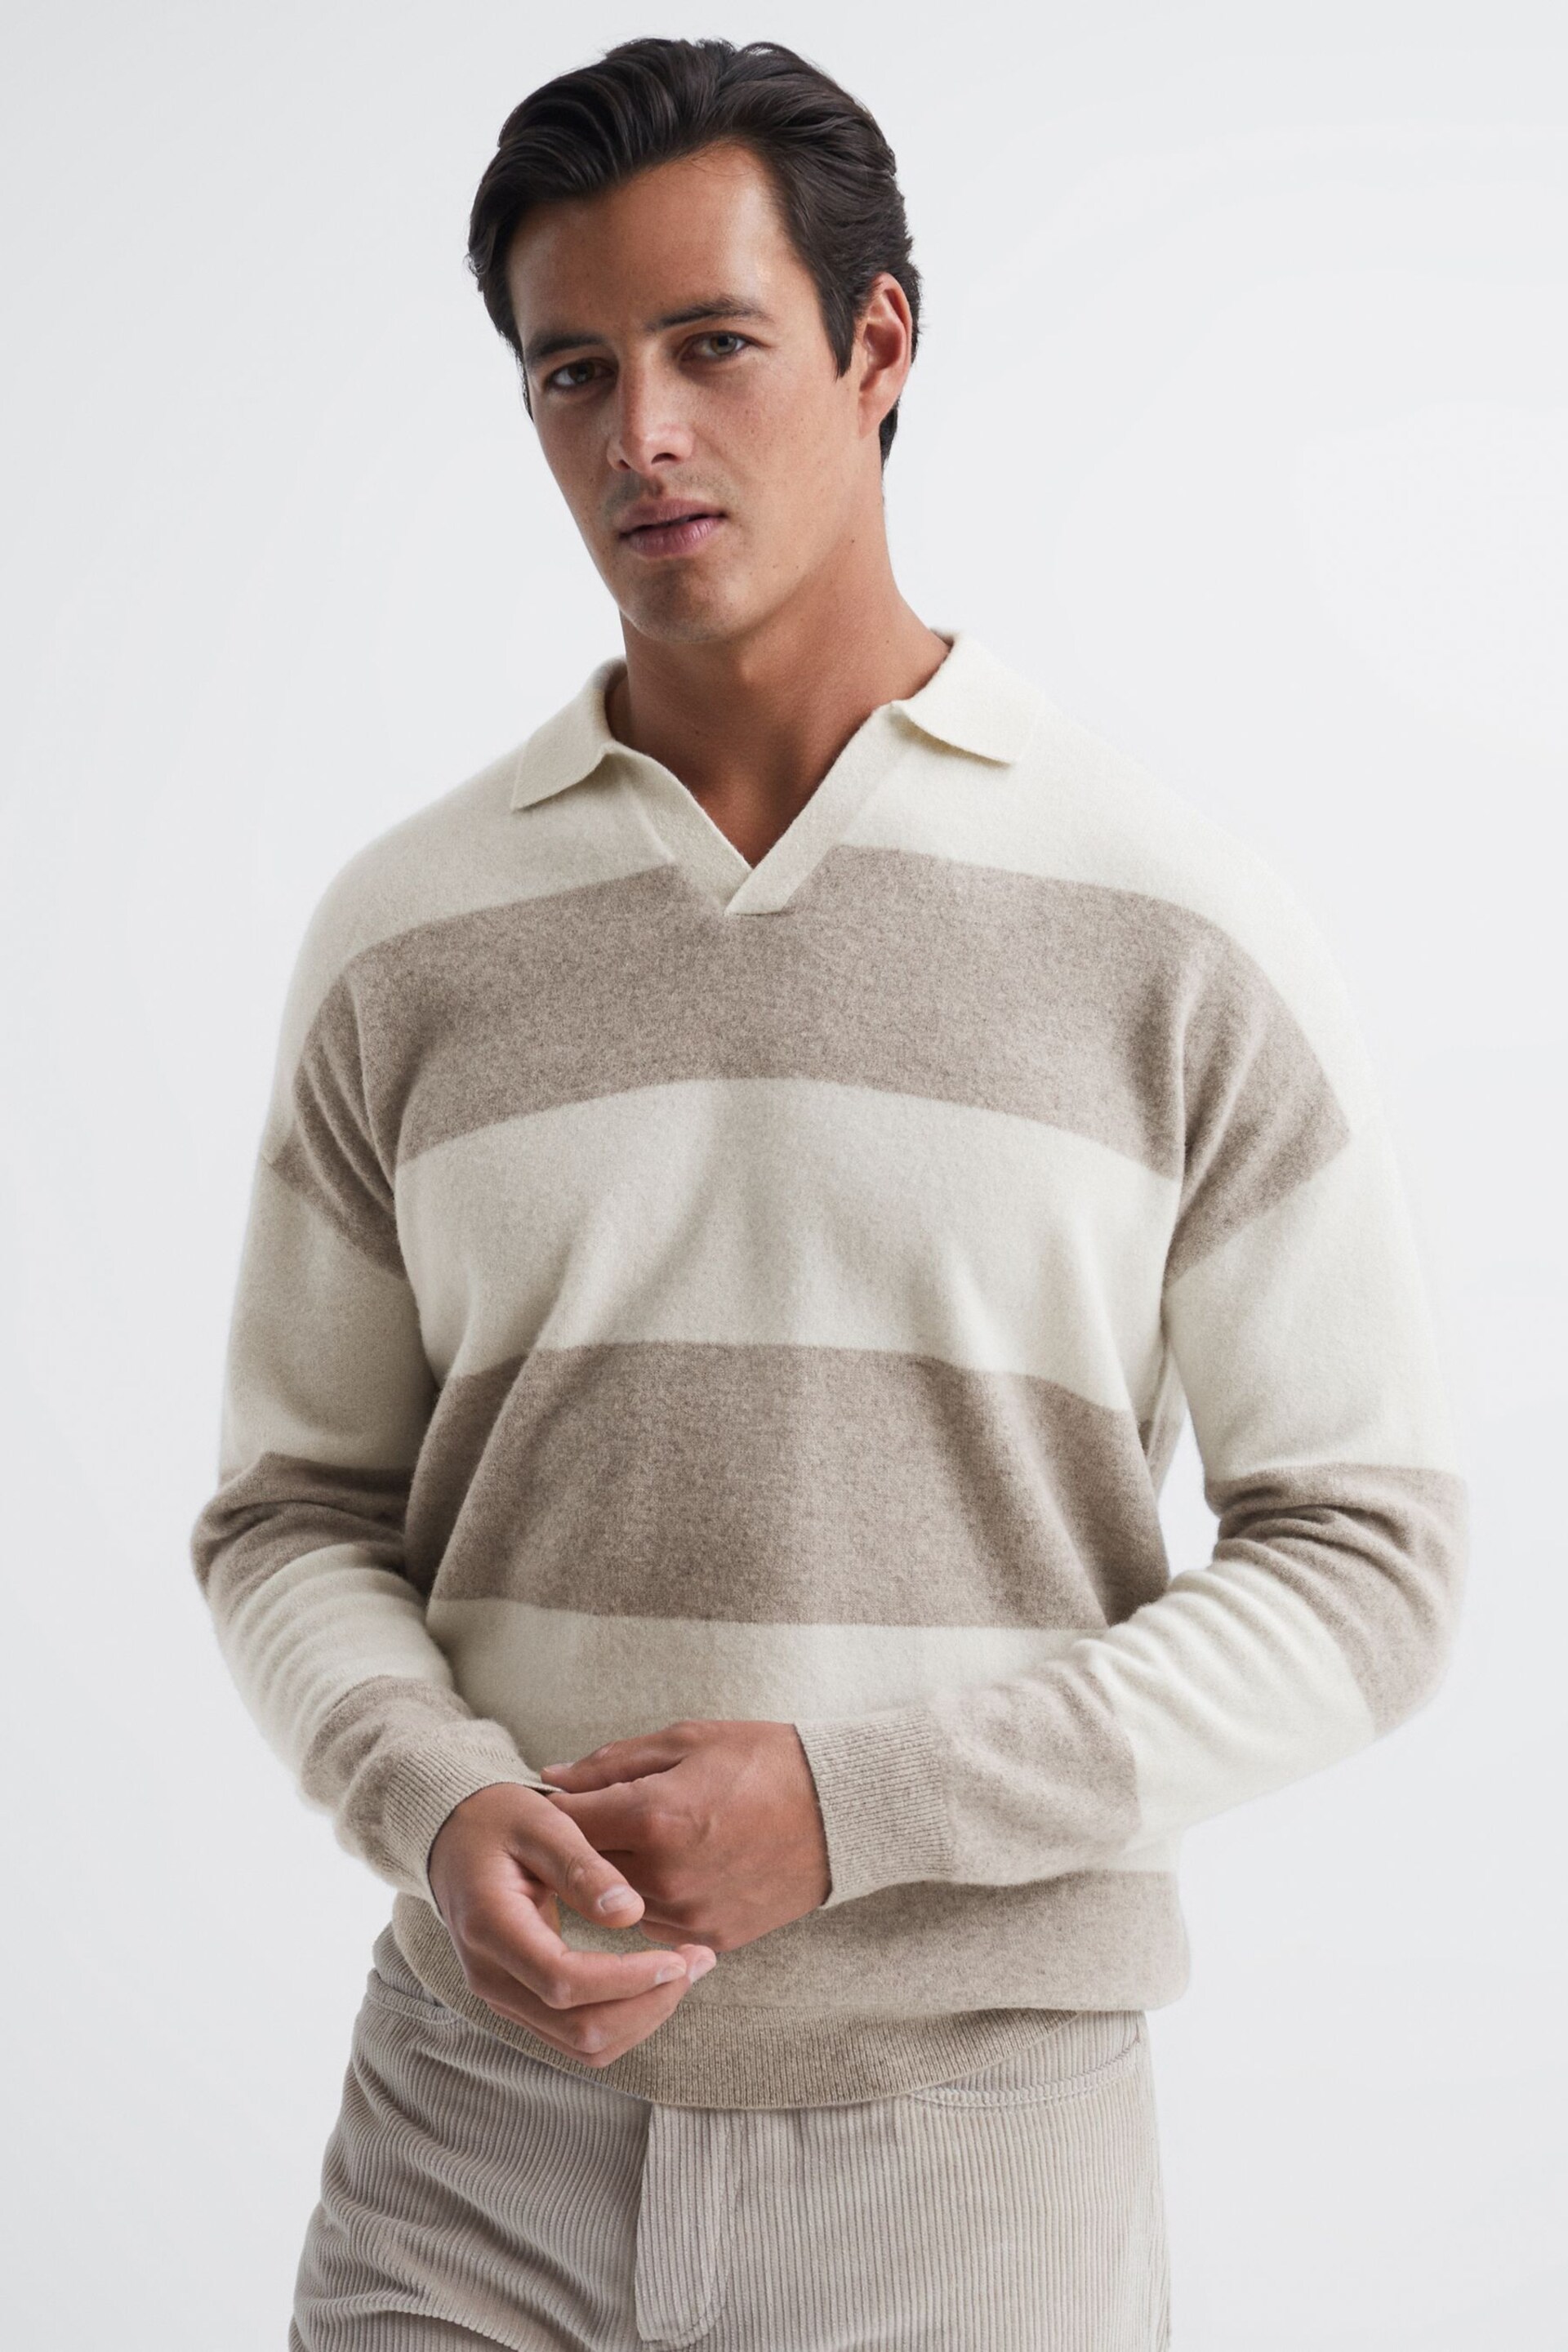 Reiss Heather / Ecru Port Striped Wool Rugby Shirt - Image 1 of 6